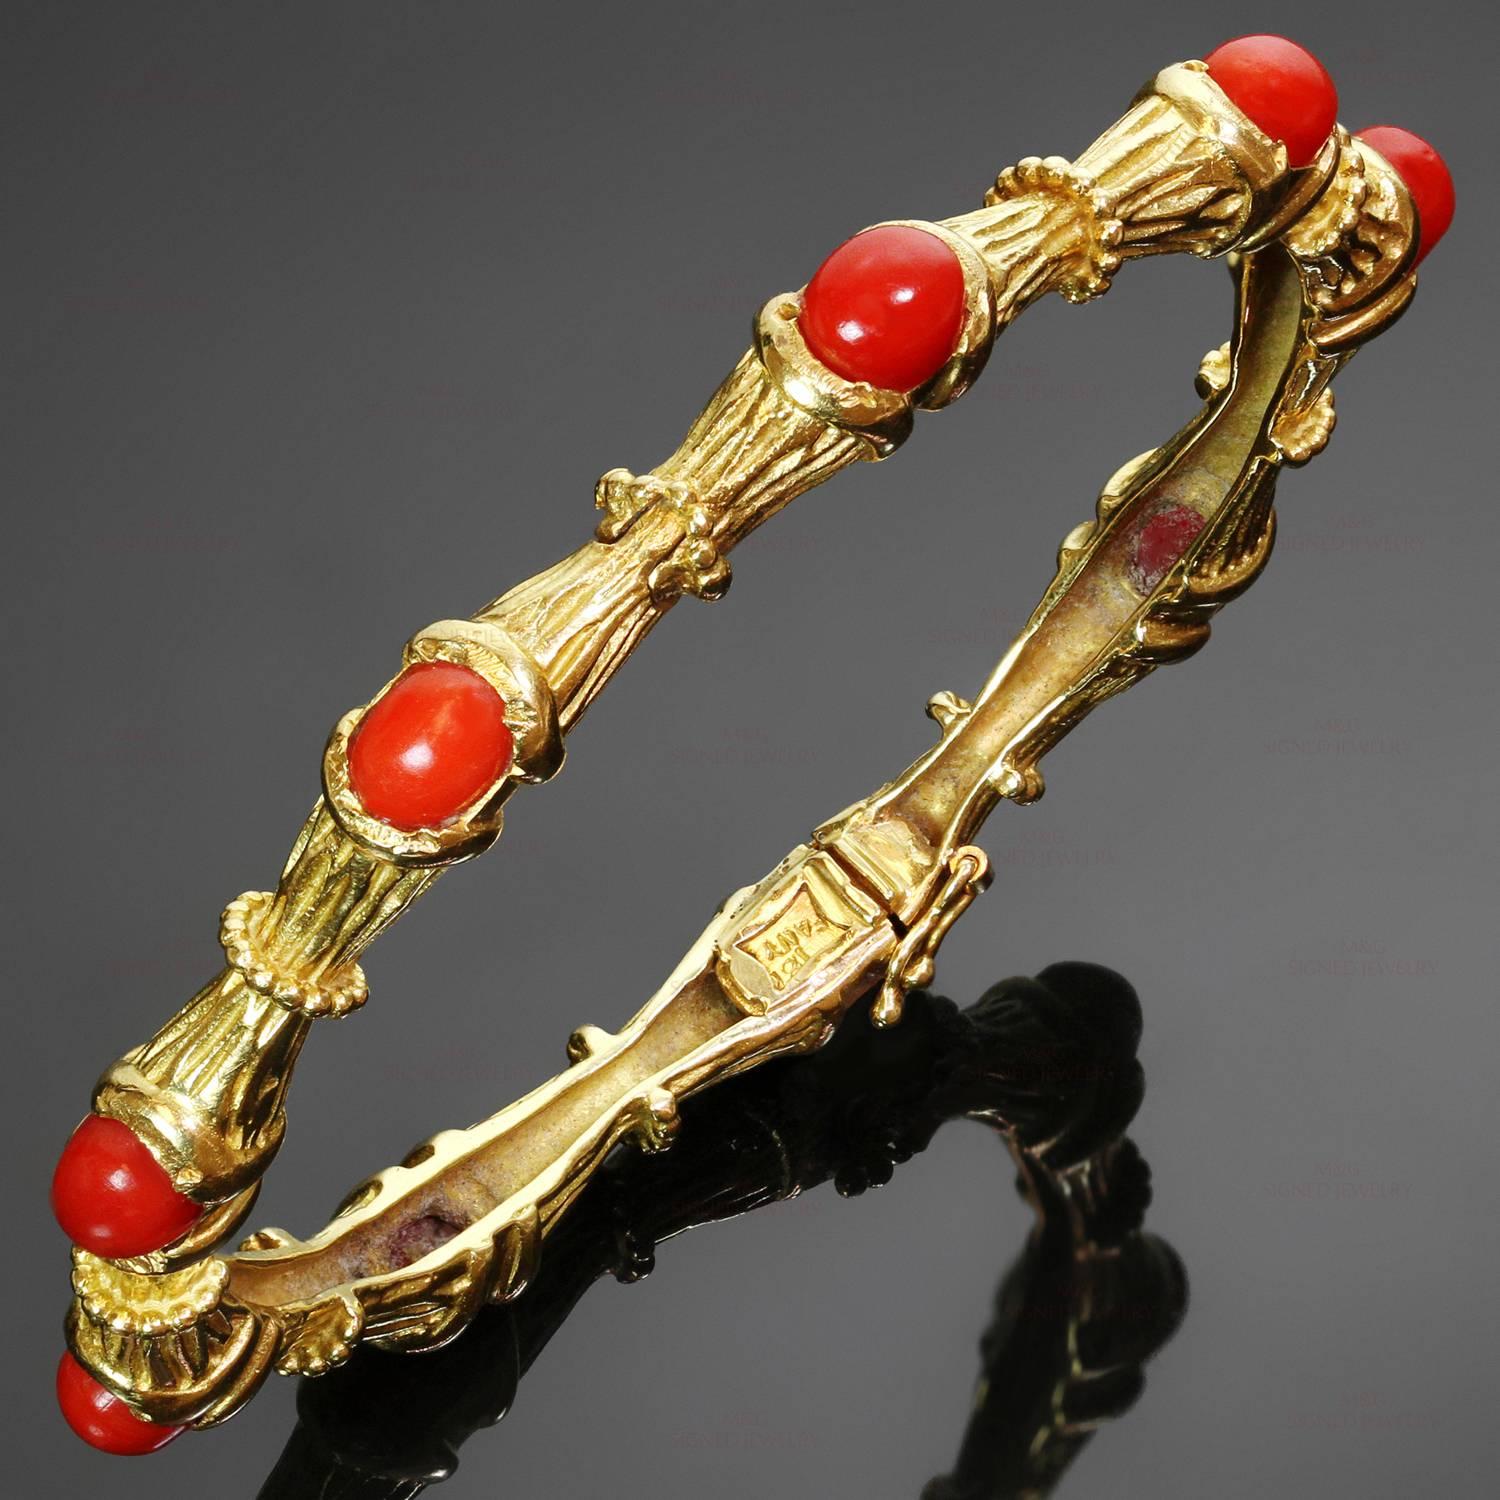 This fabulous Tiffany bangle bracelet features a bamboo design crafted in 18k yellow gold and set with oval oxblood corals. Made in United States circa 1970s. Measurements: 0.27